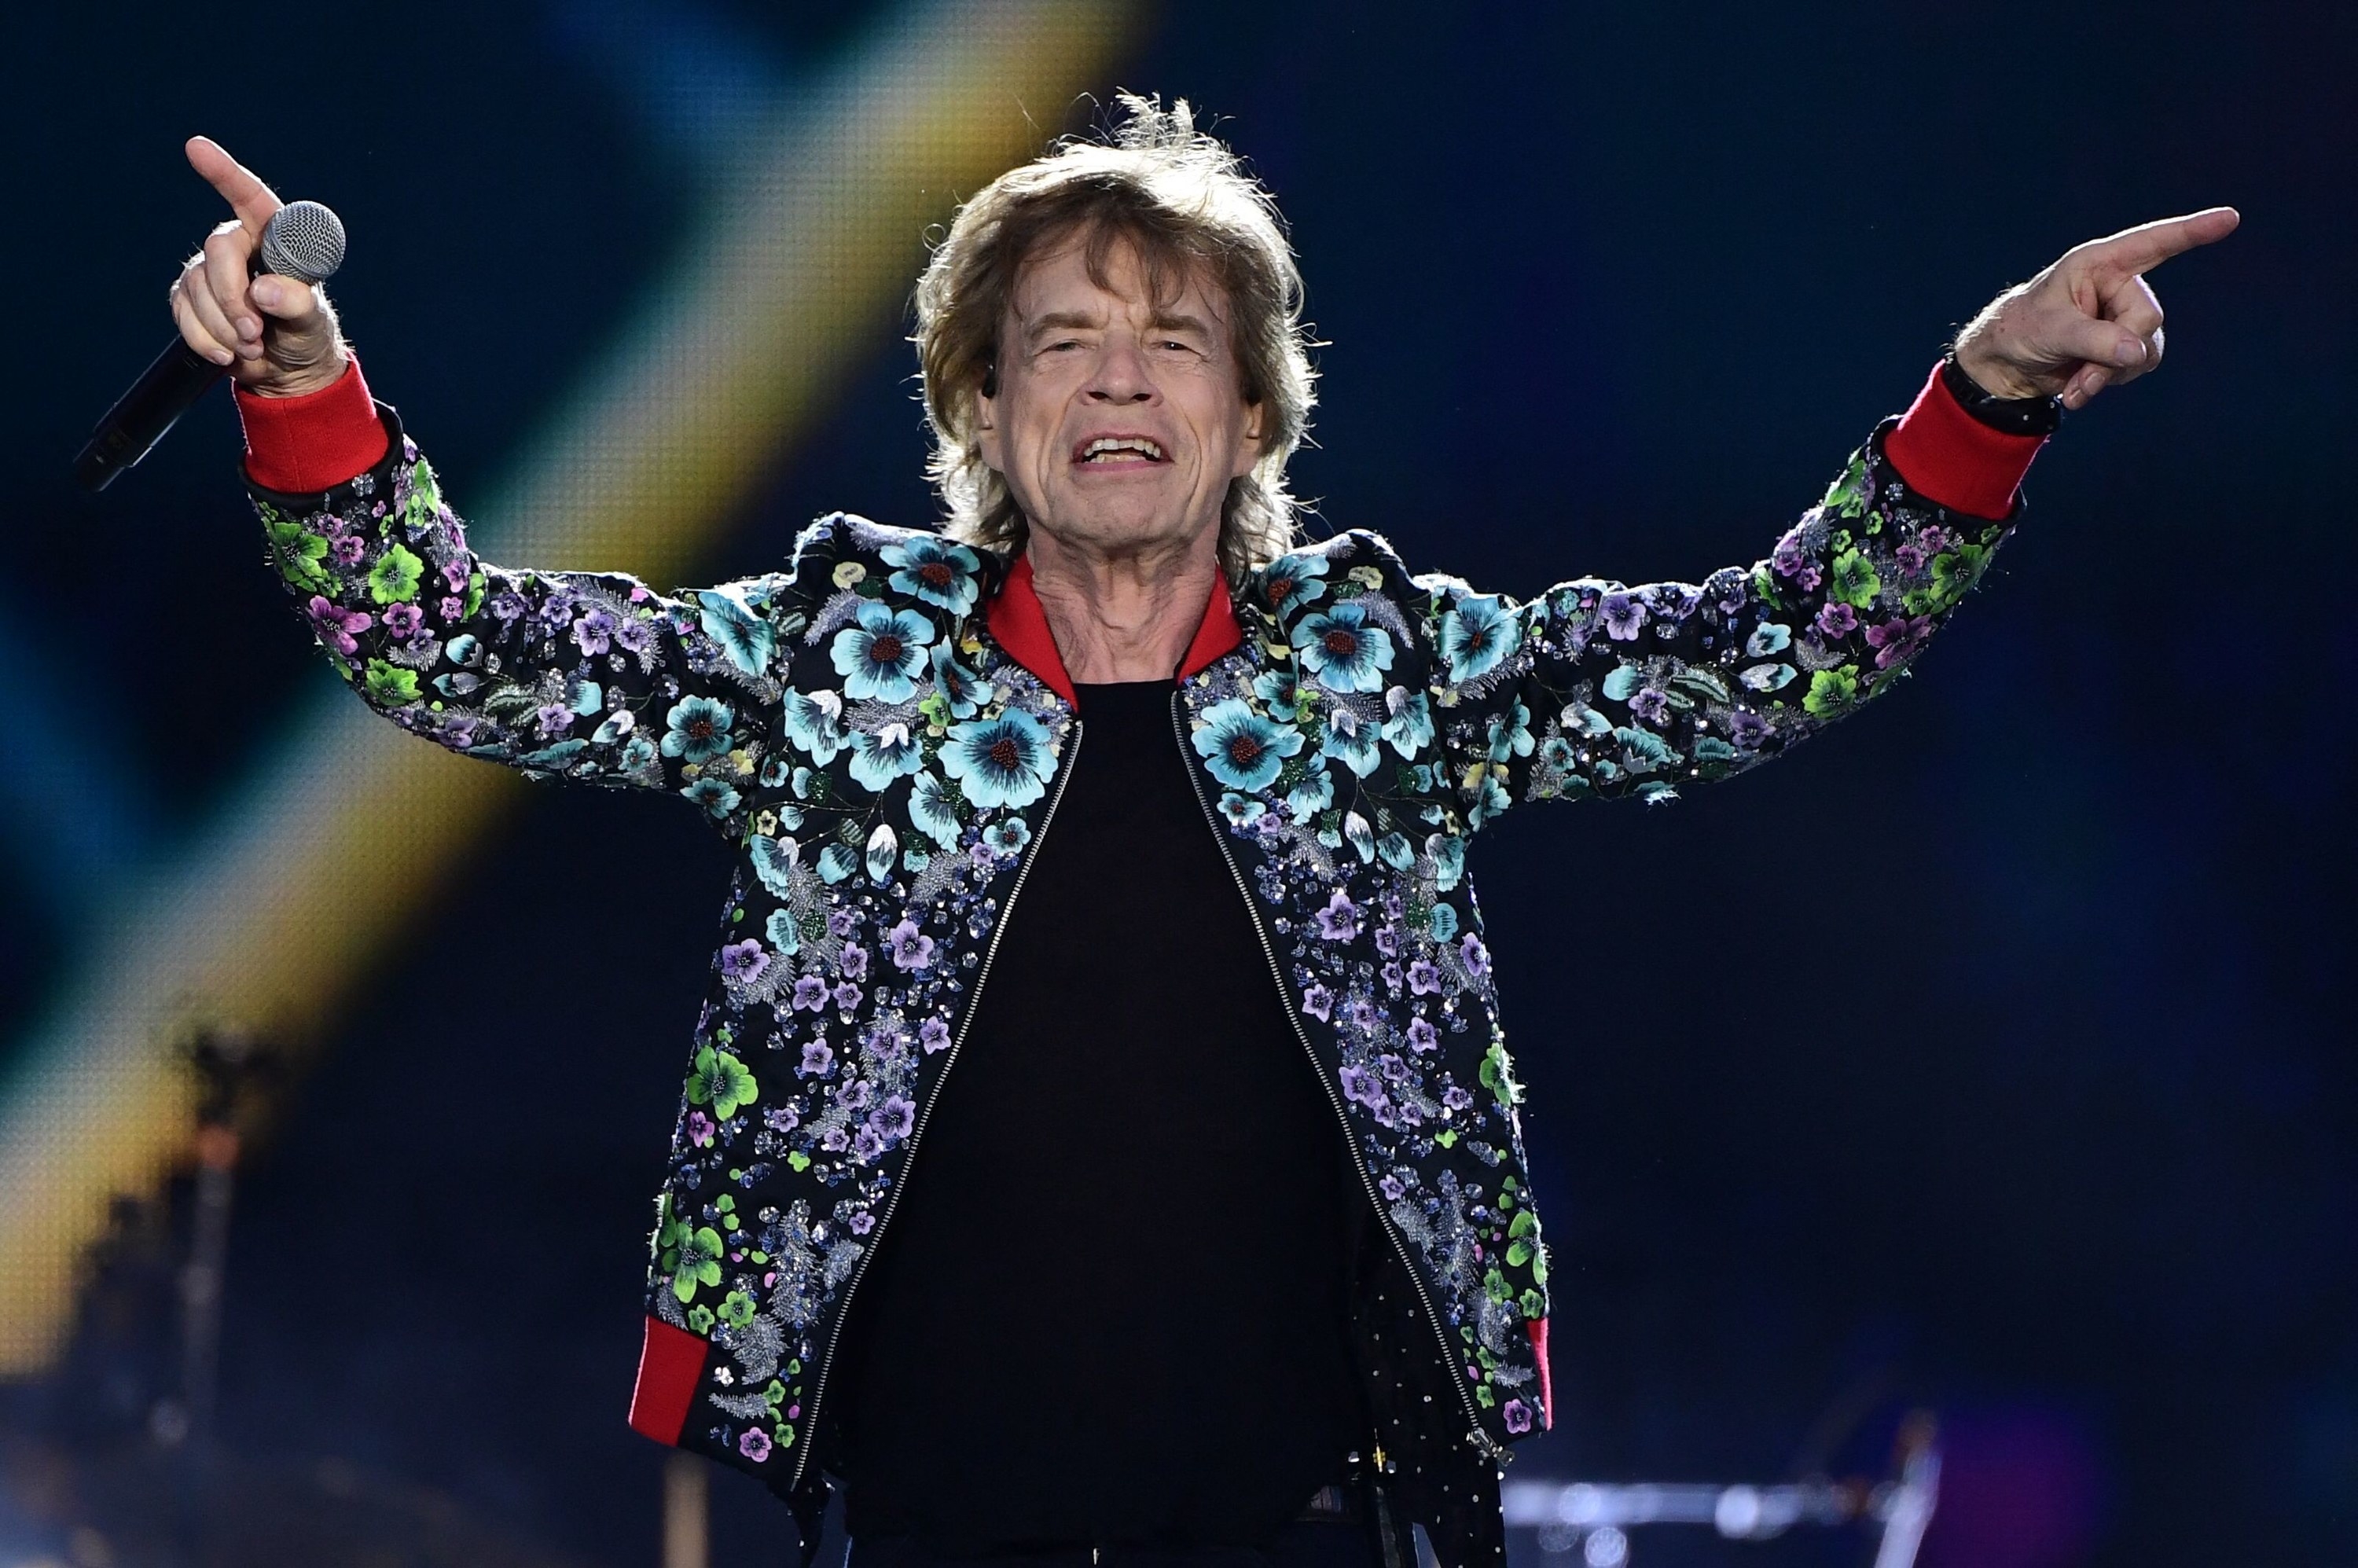 Mick Jagger performing on stage